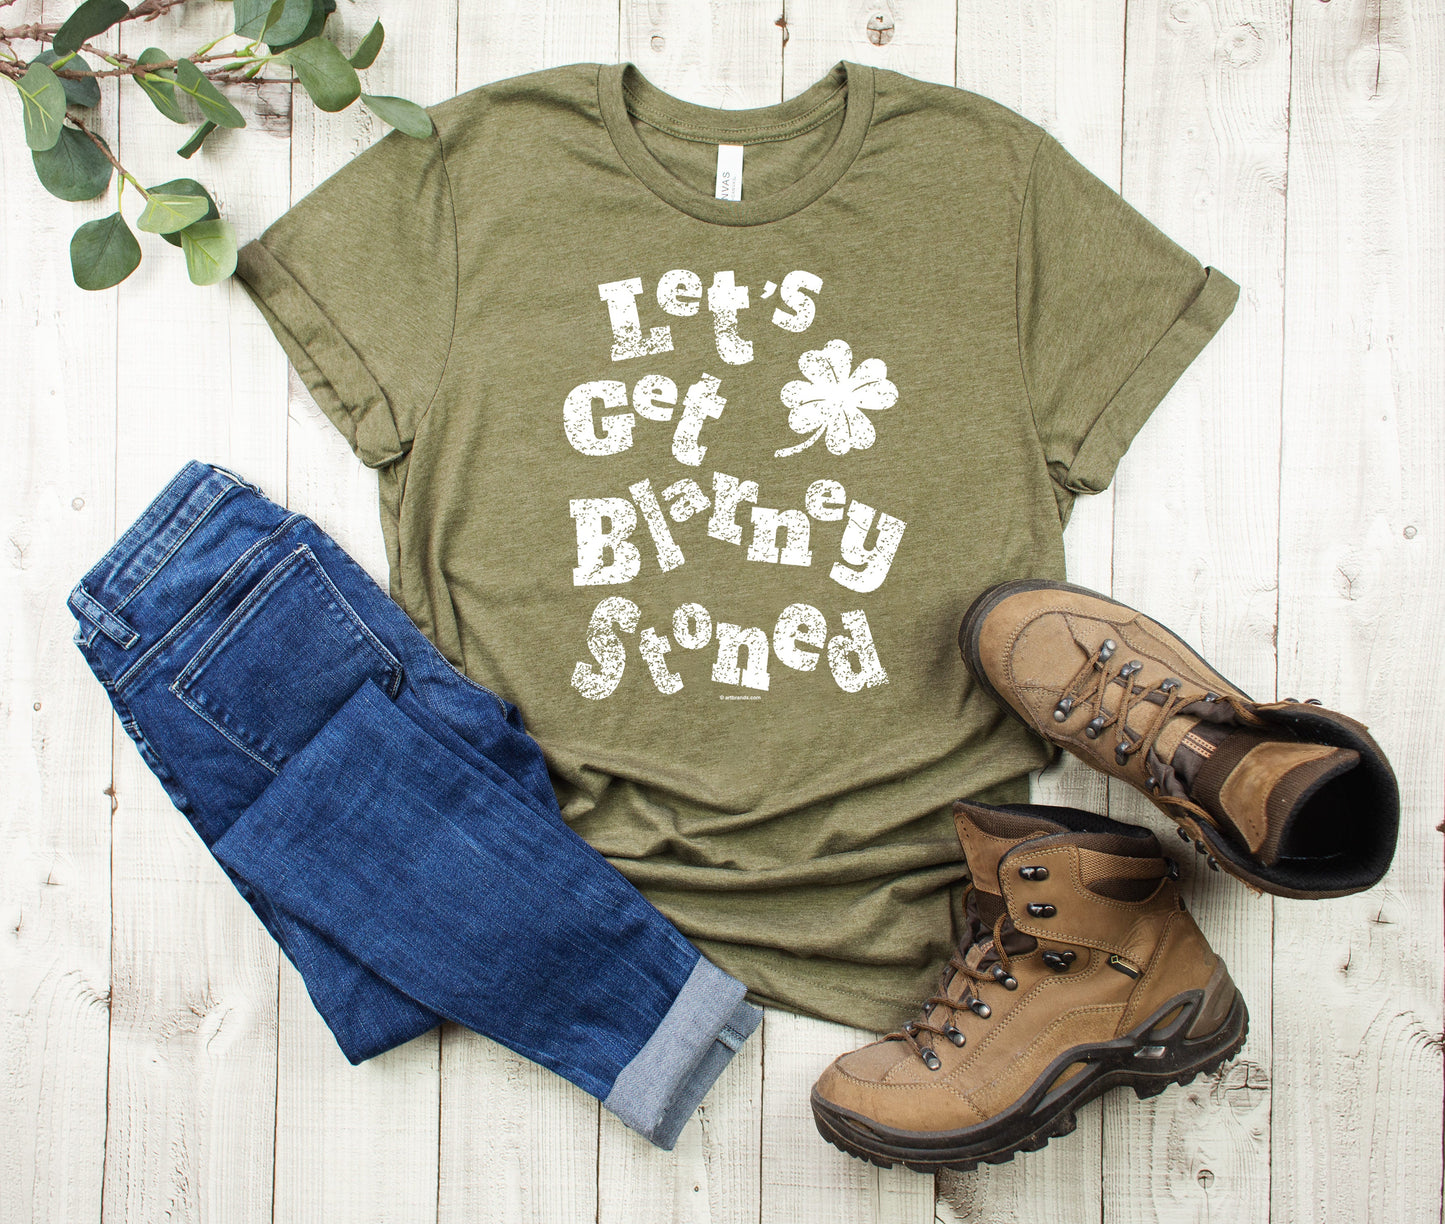 St. Patrick's Day T-Shirt, Let's Get Blarney Stoned Tee Shirt